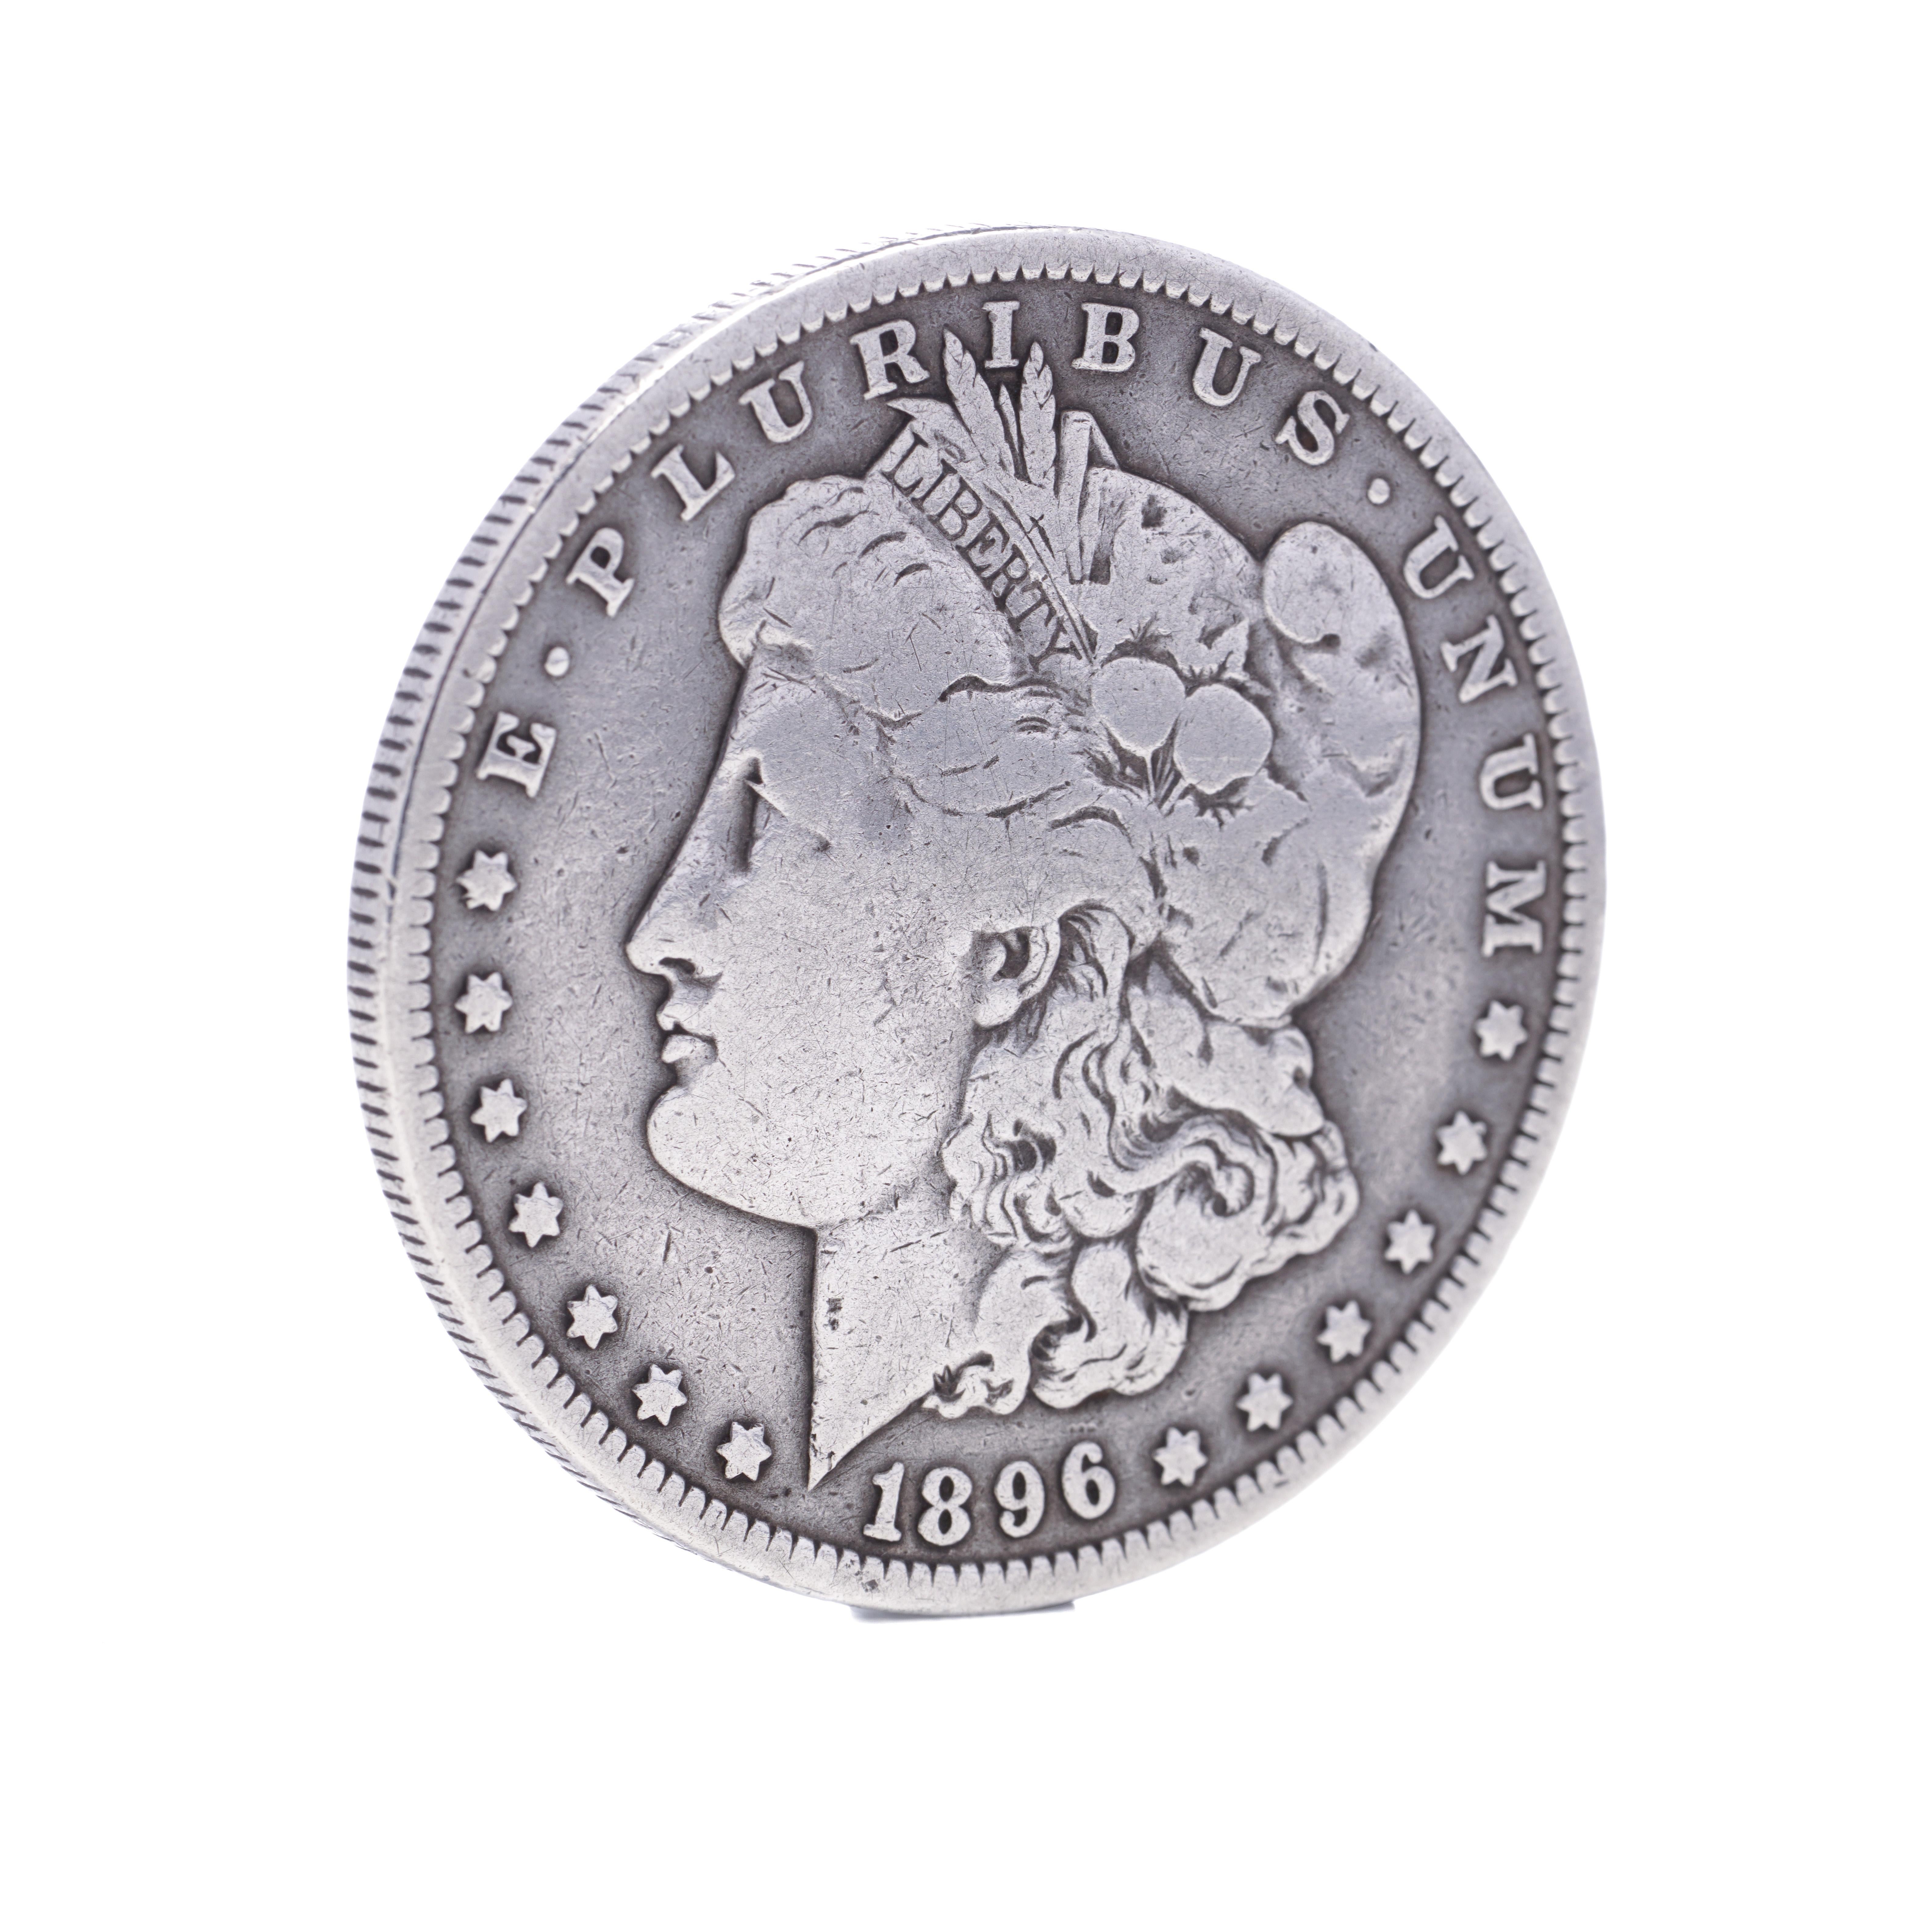 Antique 1896 Morgan dollar
Silver fineness: 900 
Made in USA, 1896
New Orleans mint. 

1878 is the first year of the popular Morgan dollar series. 

The Morgan Dollar is one of the most famous coins in American history. It evokes images of the Wild